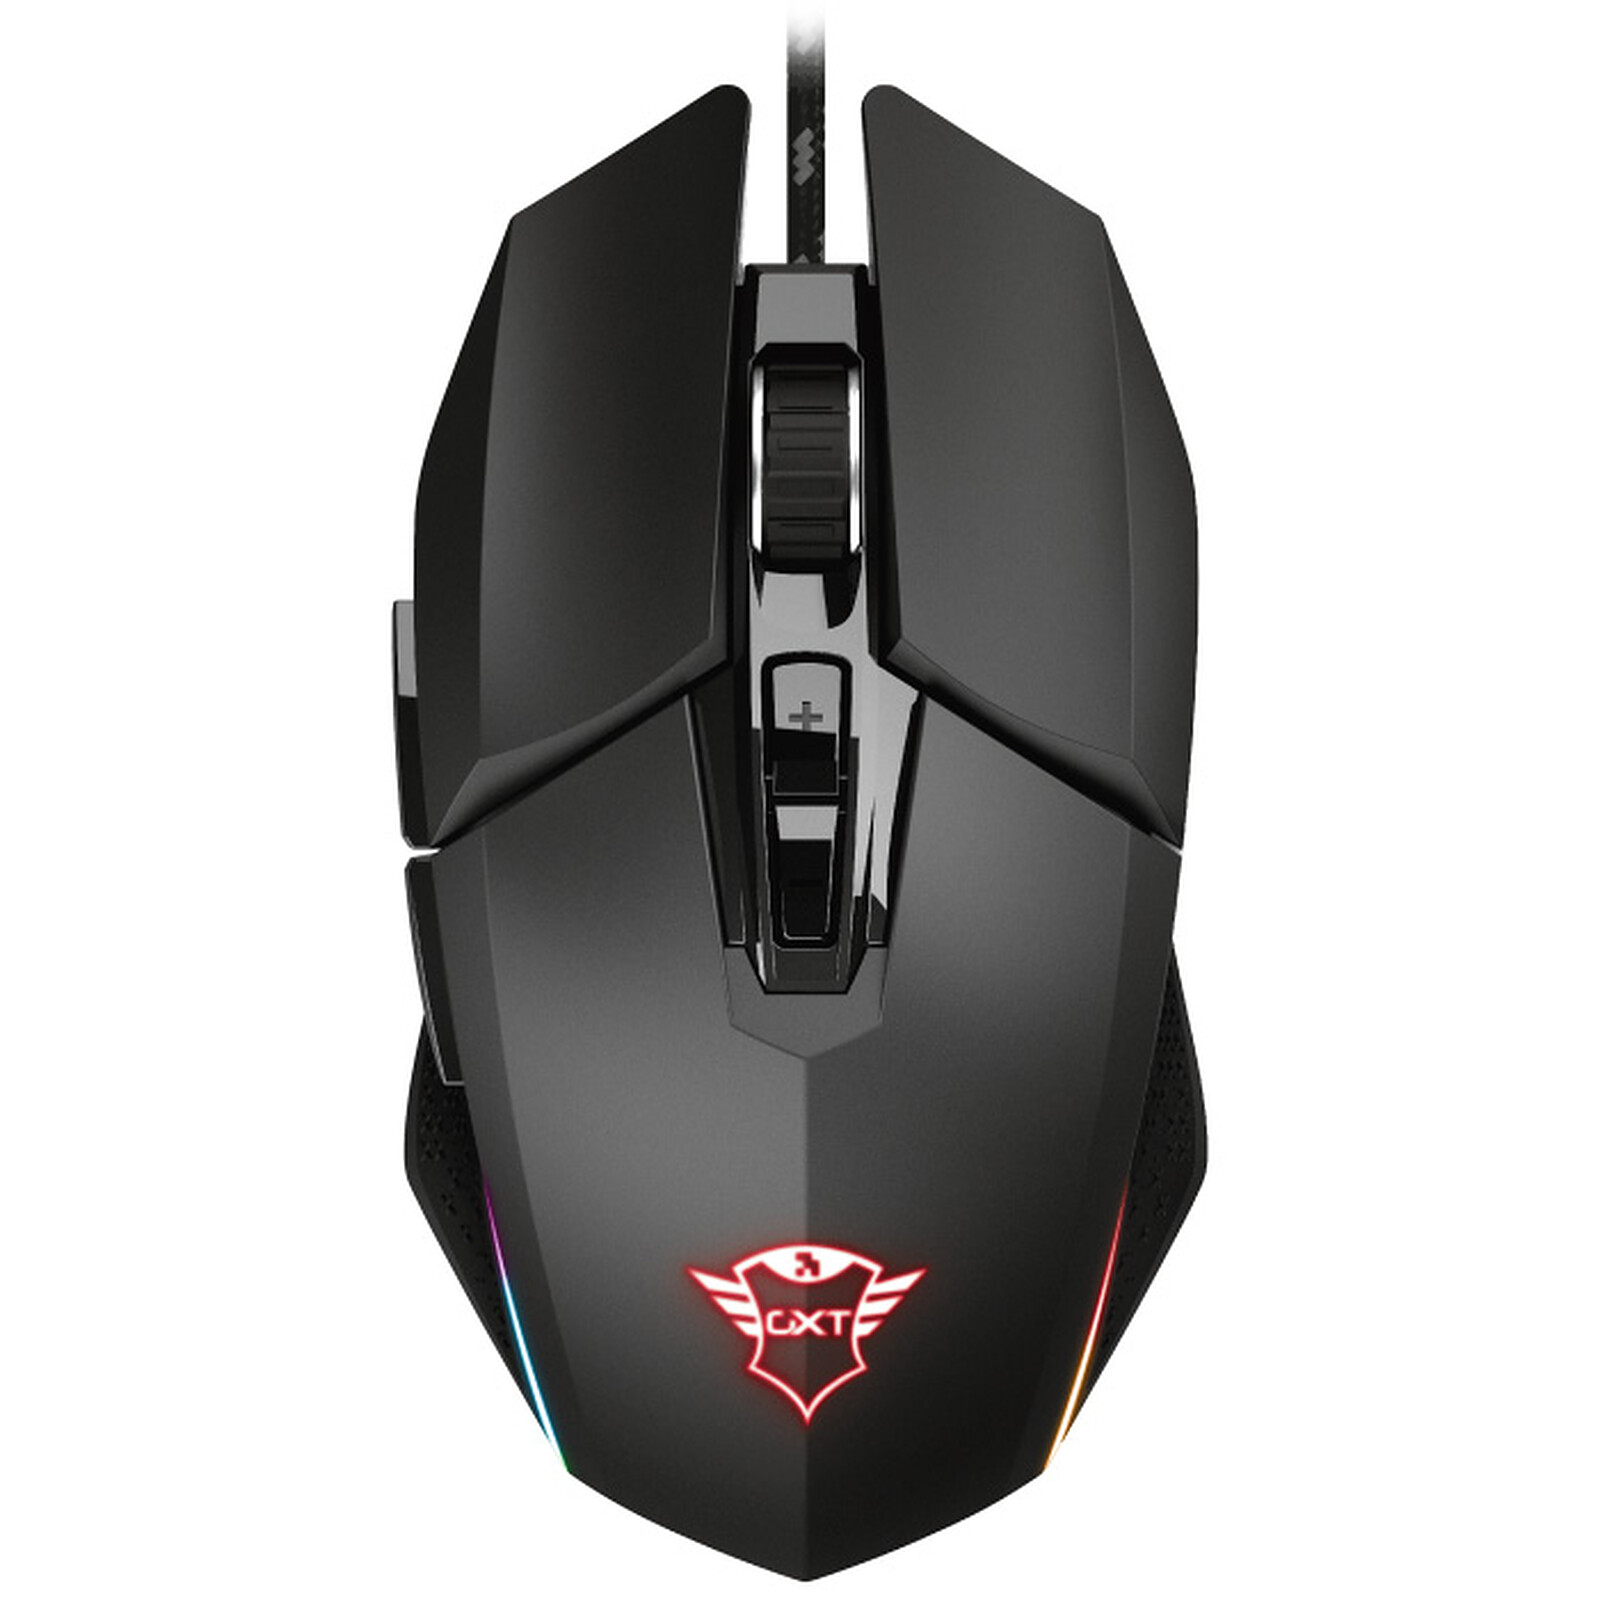 Gaming GXT 950 Idon Mouse Trust LDLC | Holy Moley